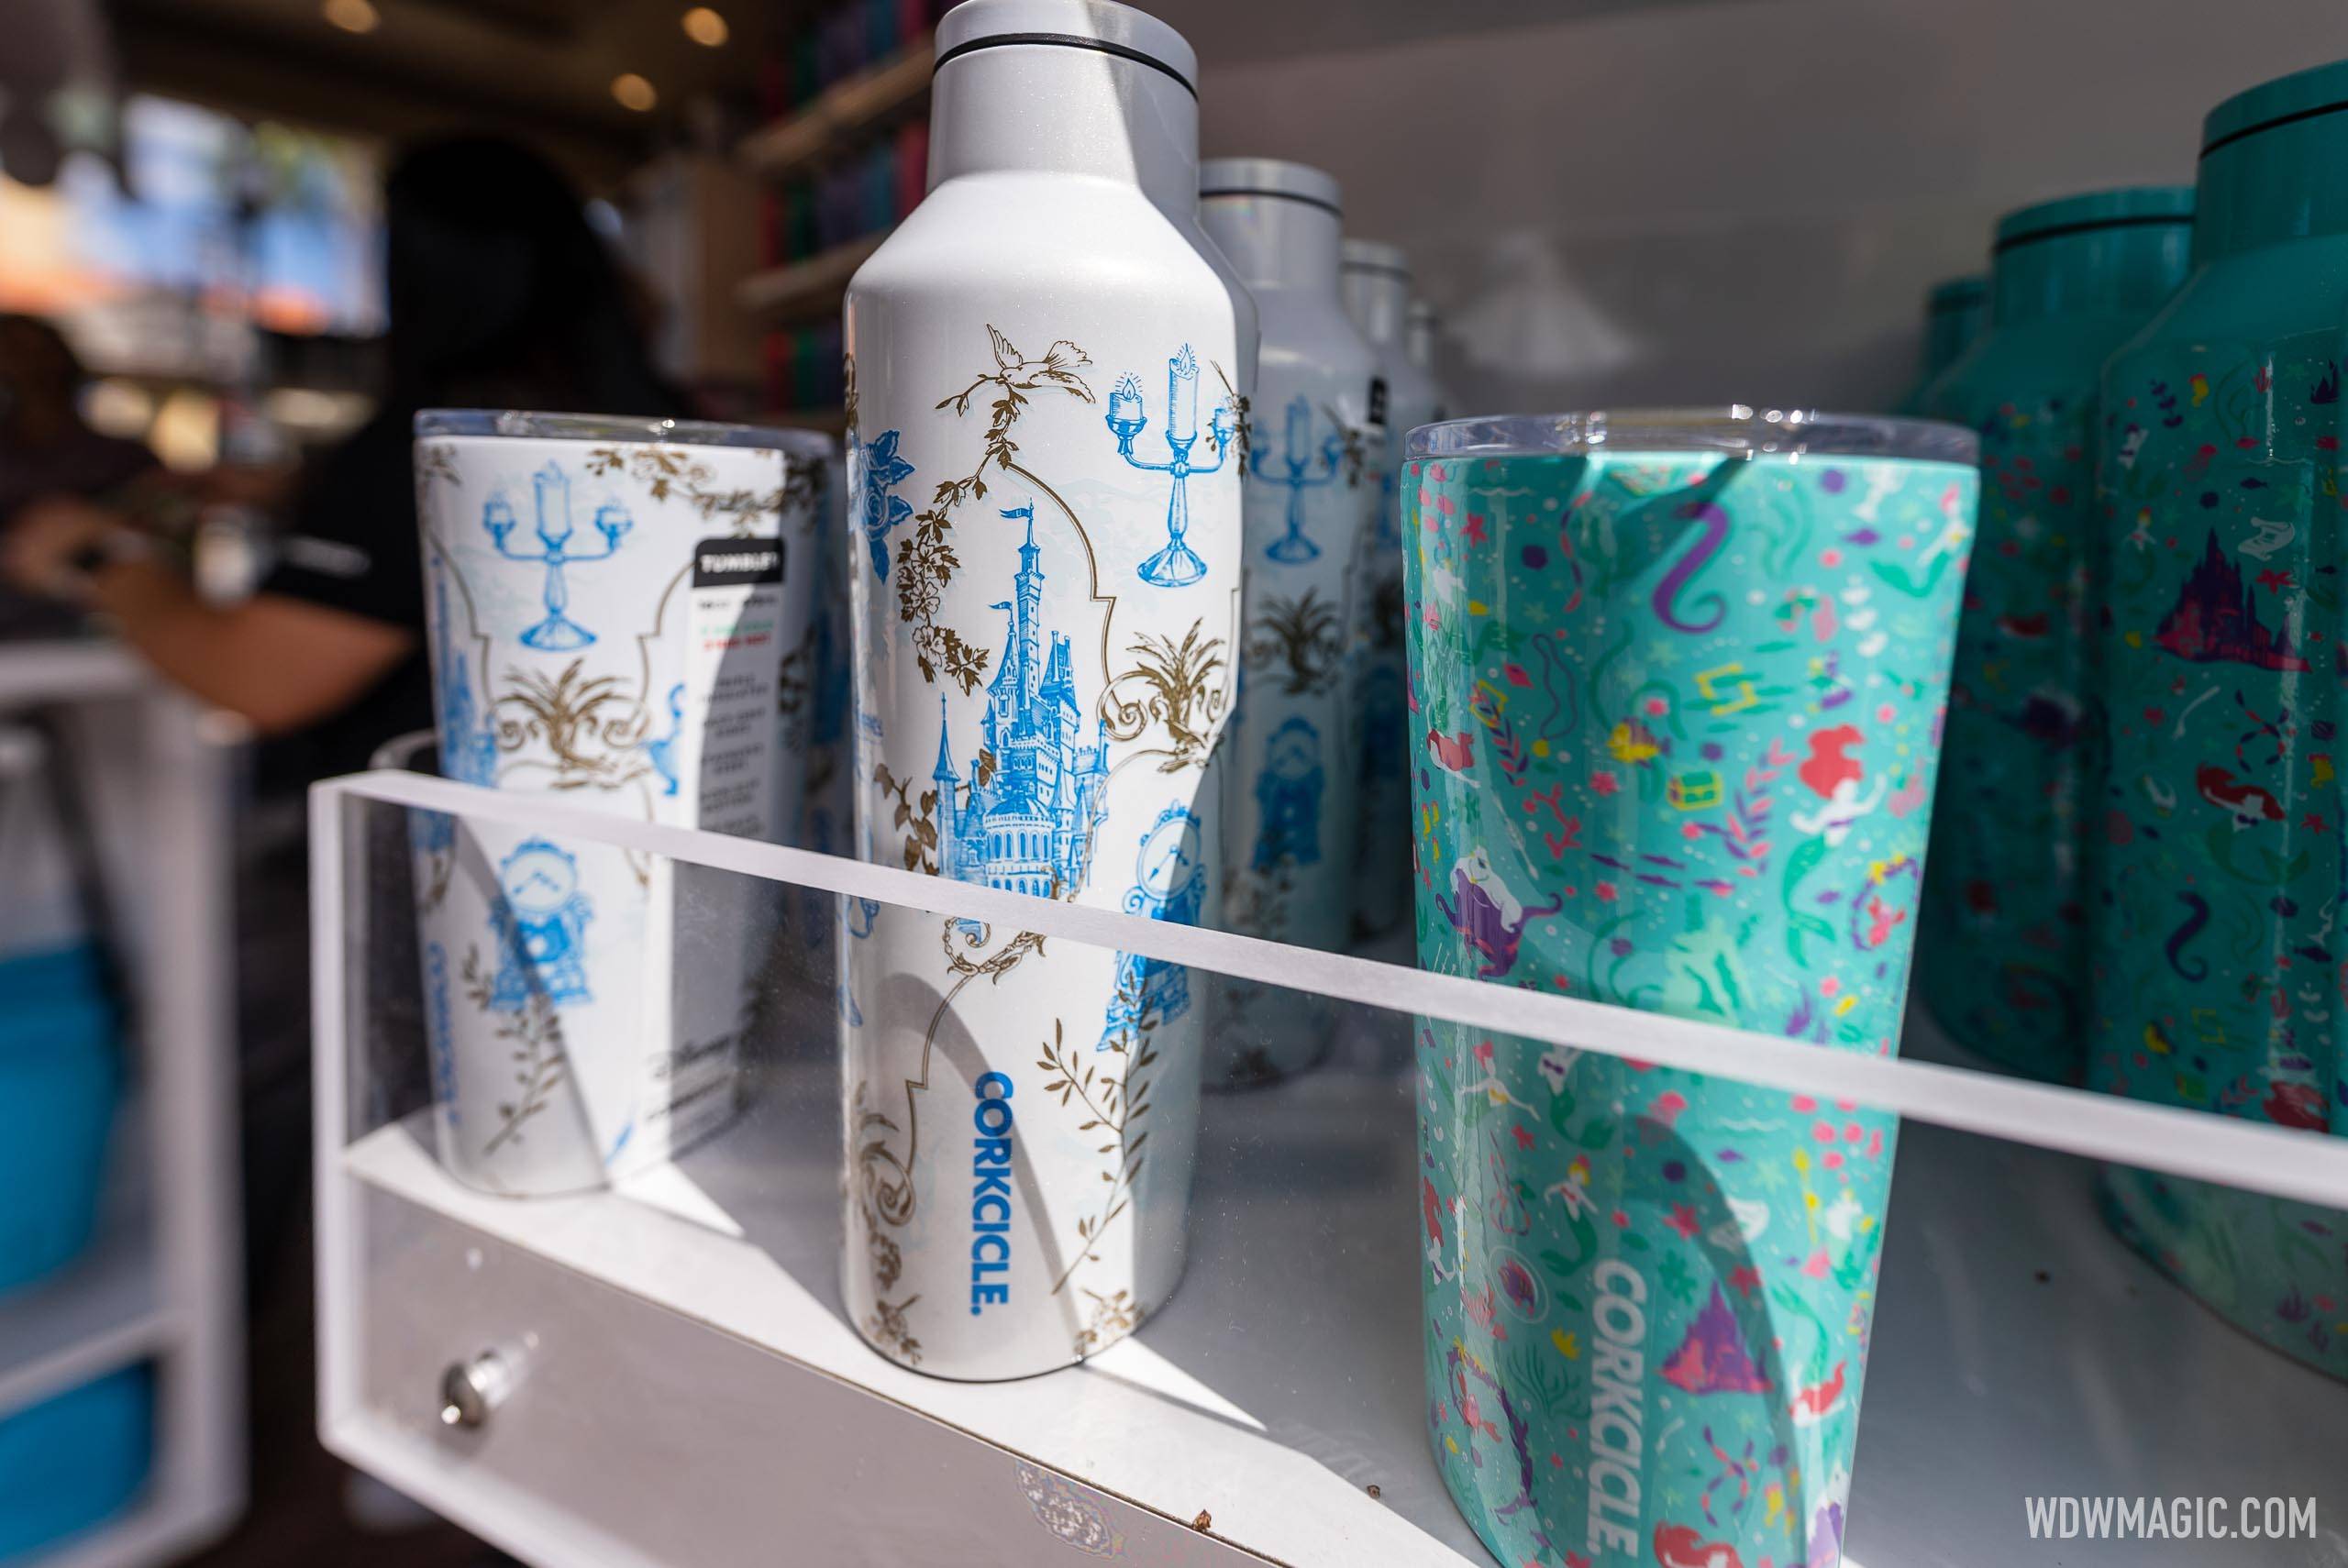 New Disney Corkcicle coming to the - Montgomery Gardens